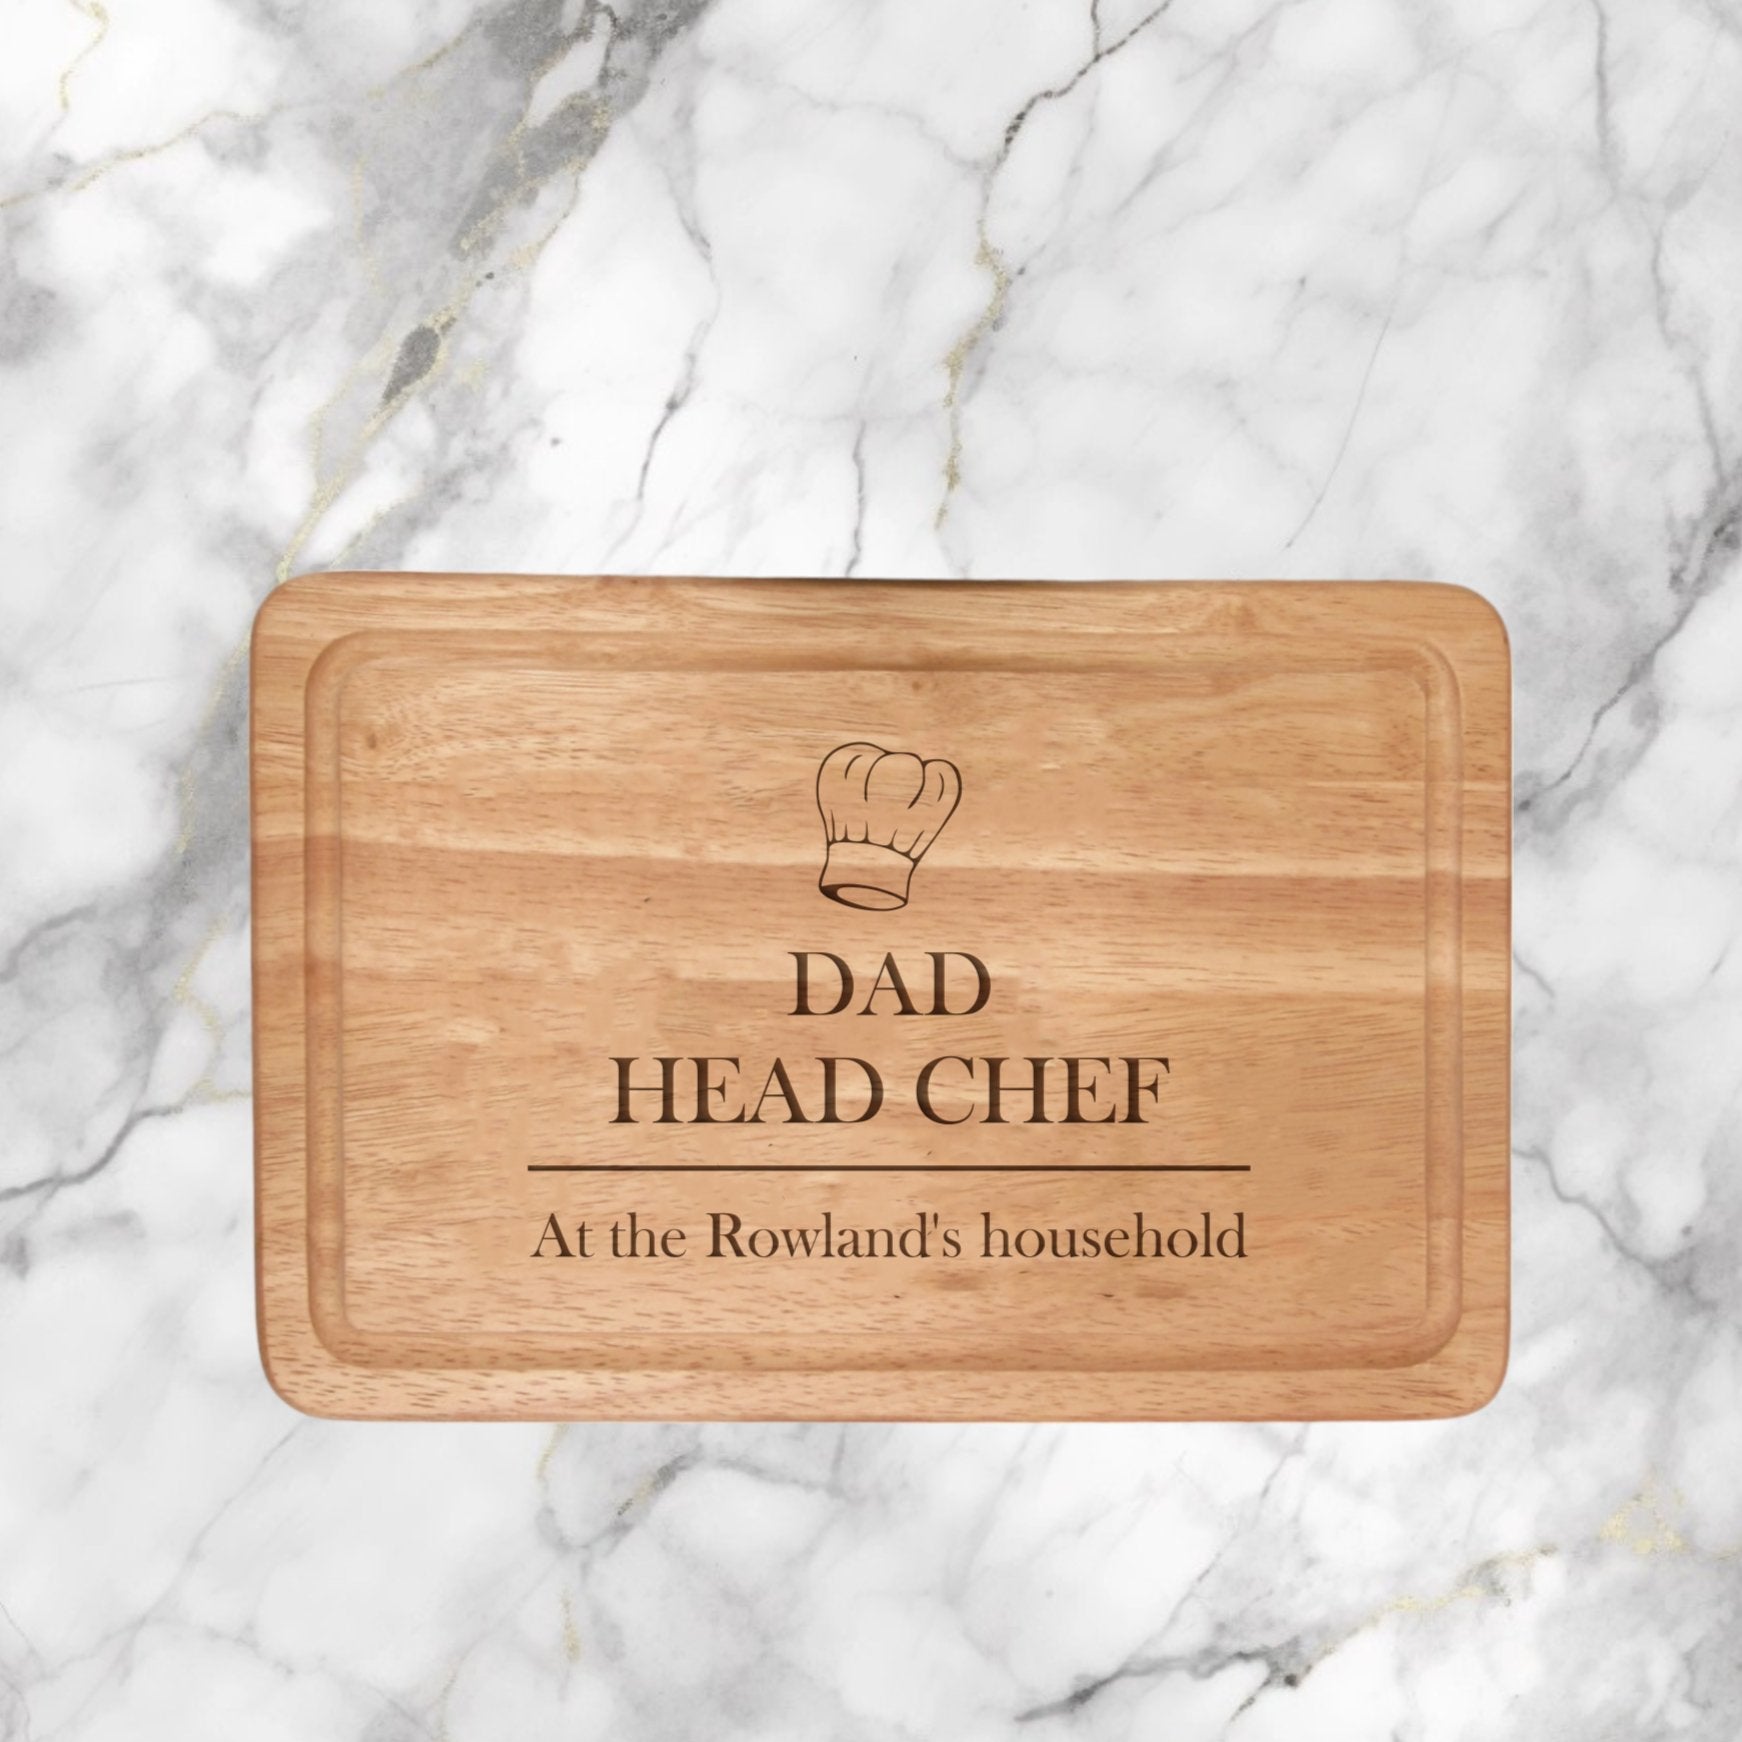 Elevate your kitchen with our 300mmX200mm Personalized Chopping Board. Crafted from premium Hevea Wood, this board features intricate laser-engraved customization, including up to 3 lines of text (20 characters each) and a charming chef hat detail. Ideal for special occasions or daily use. Hand-wash only. Order now for a unique, lasting addition to your culinary space!